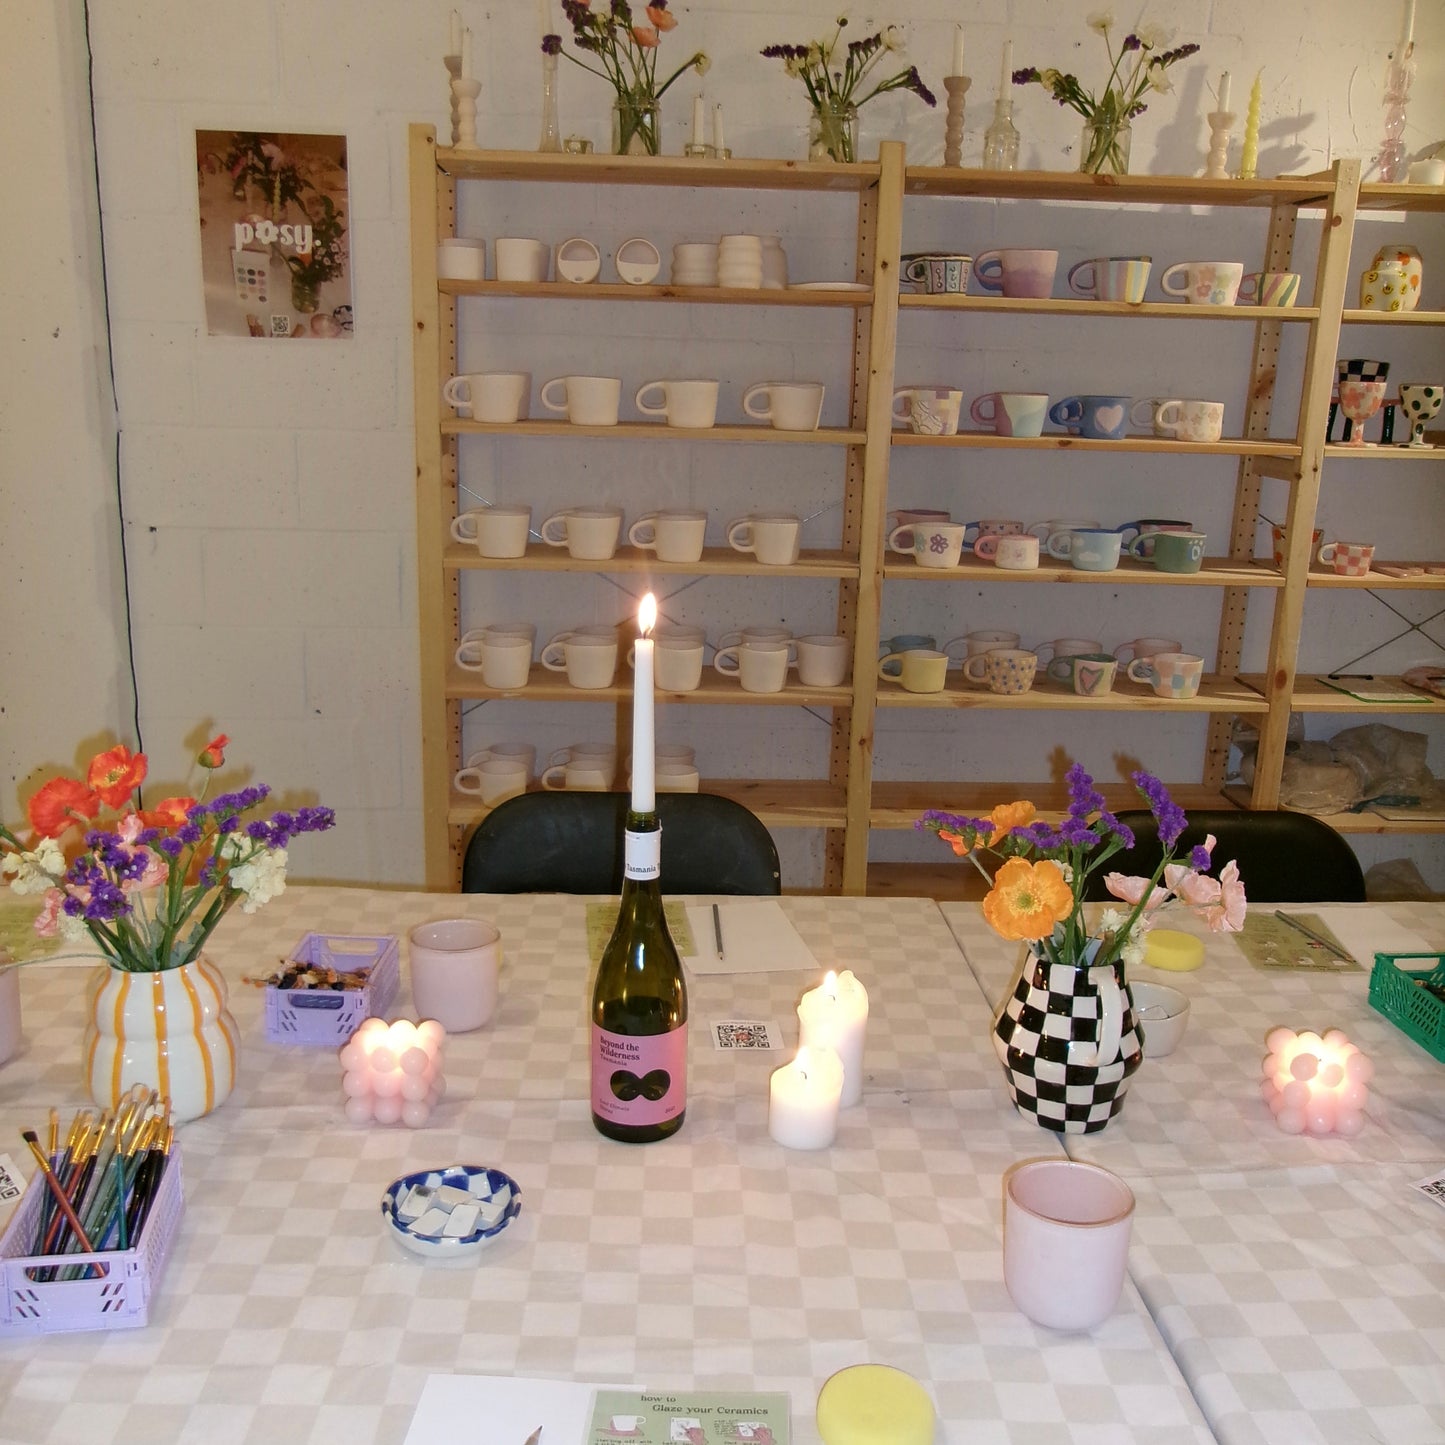 Prosecco & Pottery Painting Workshop (18+)